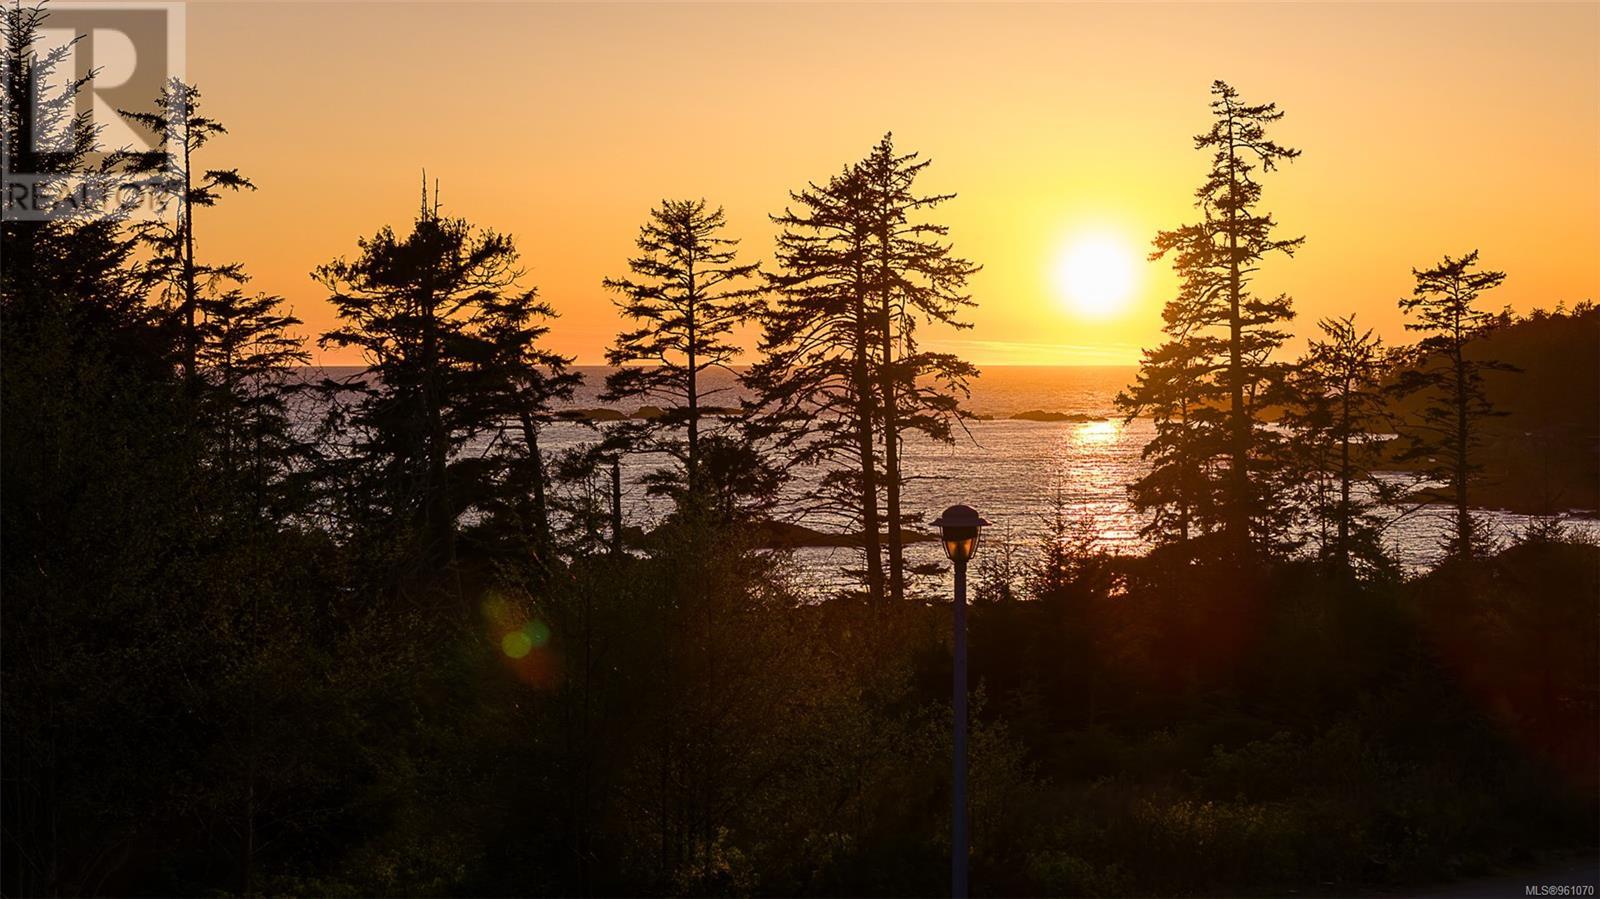 Lot A Marine Dr, ucluelet, British Columbia